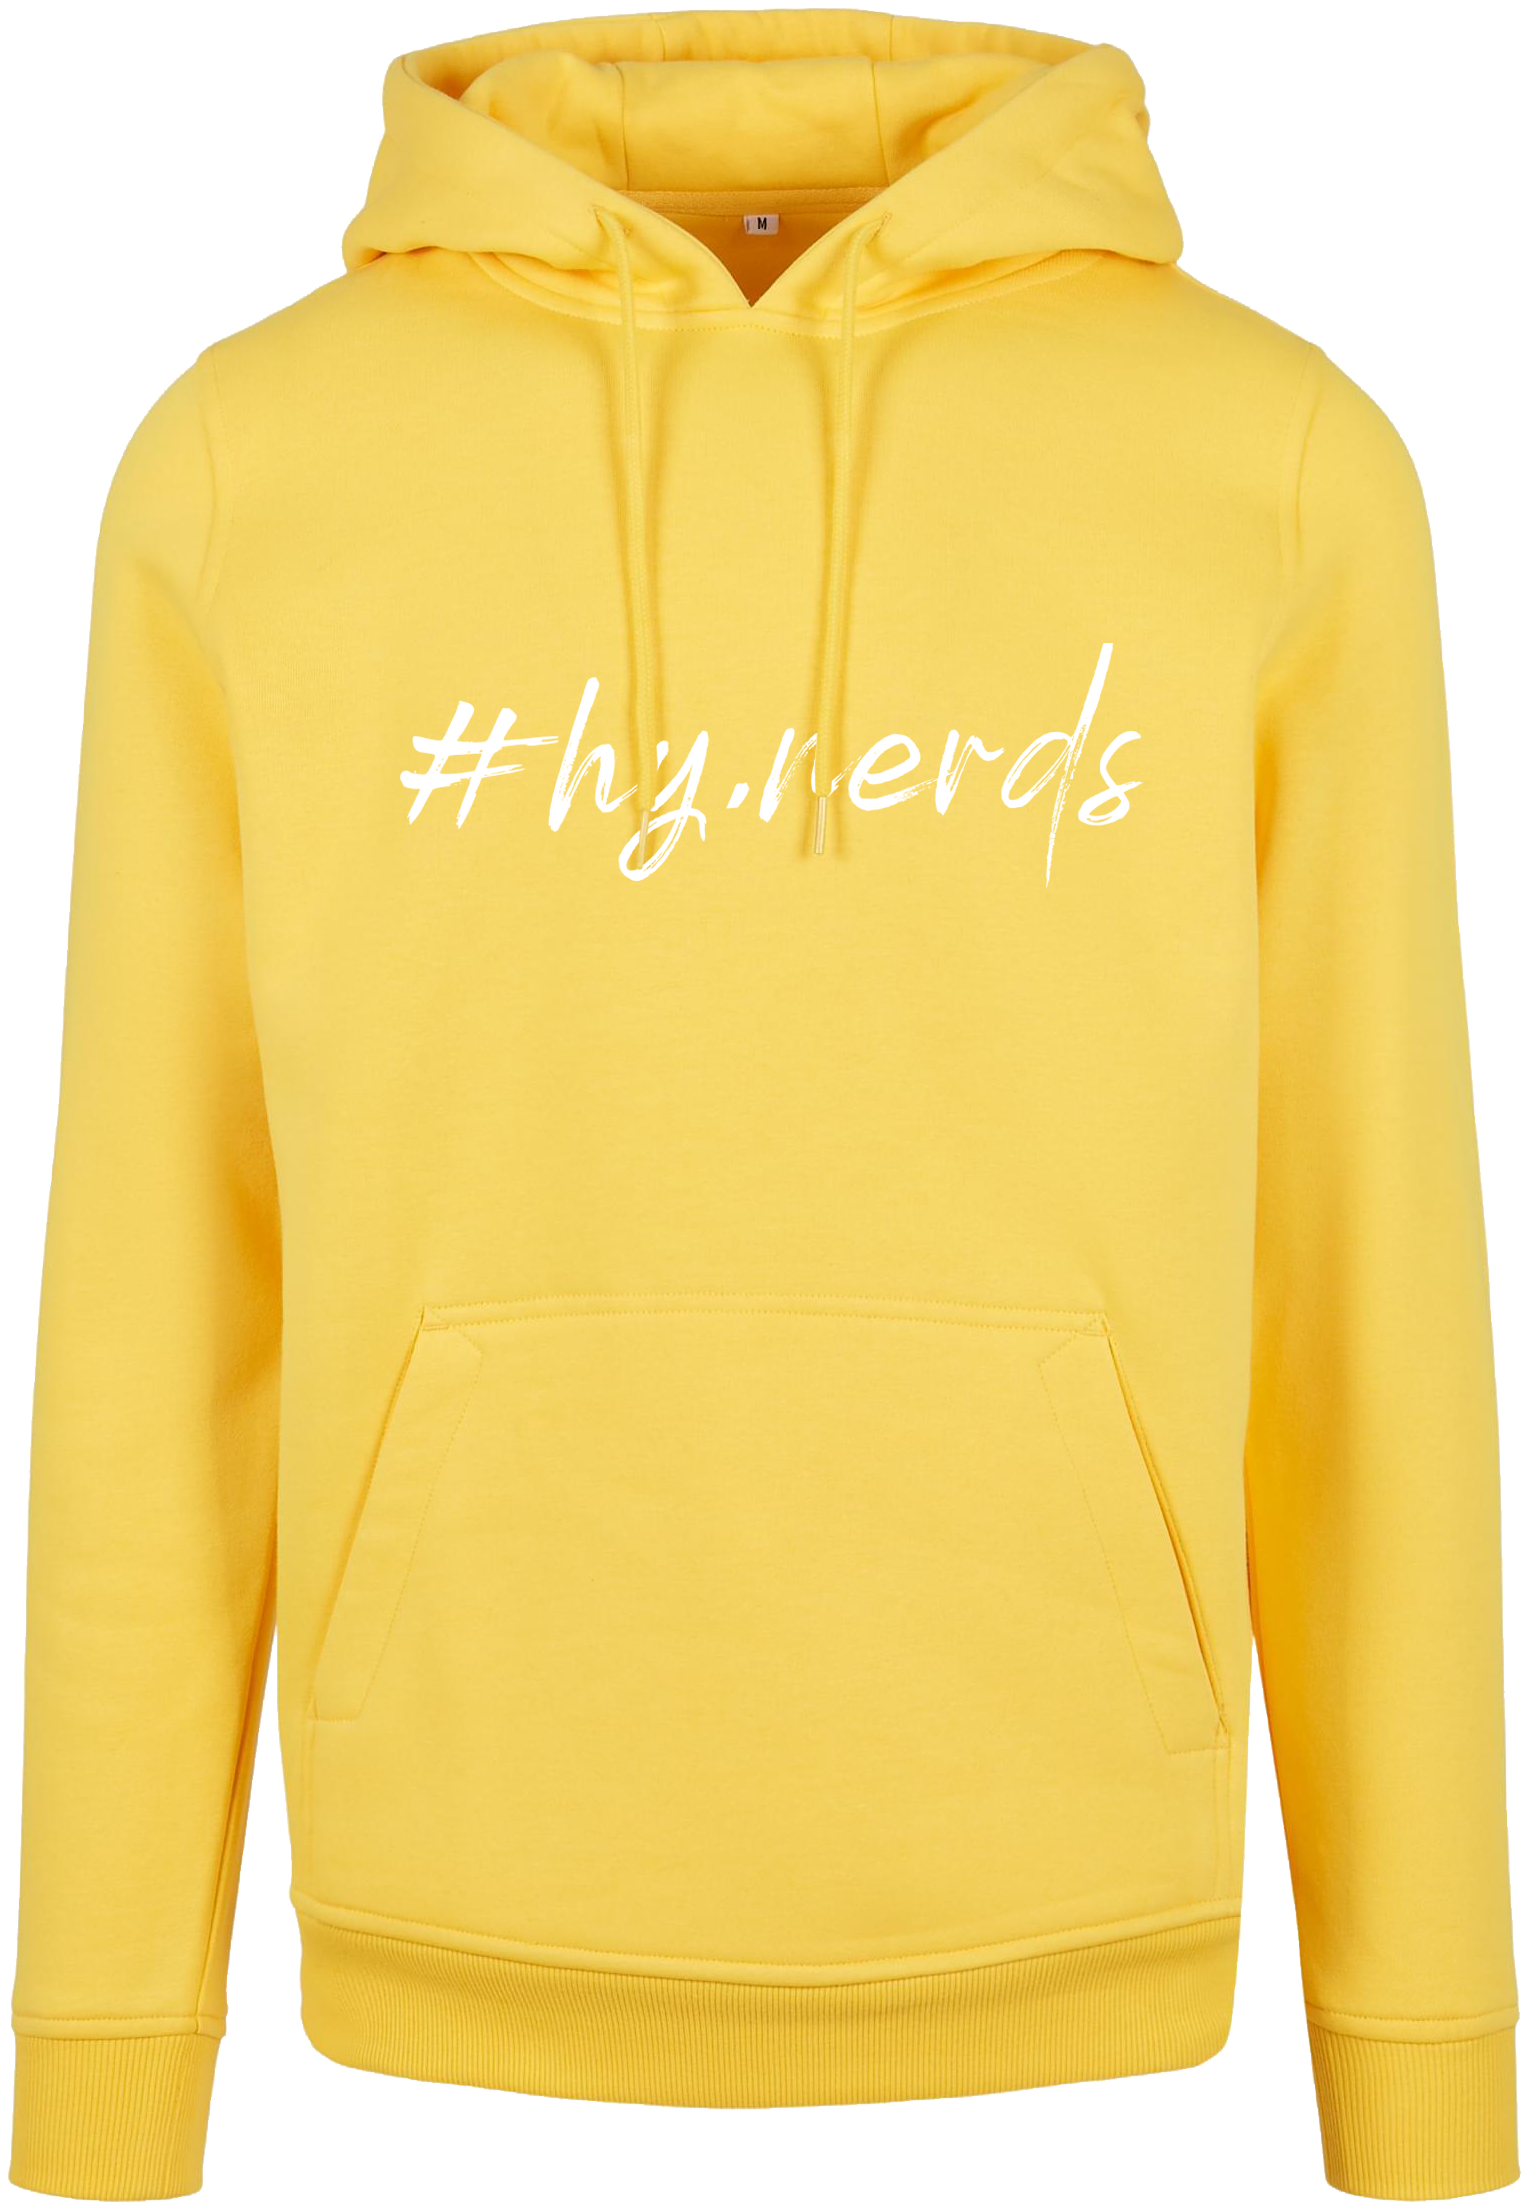 Pikle taxi yellow Hoodie